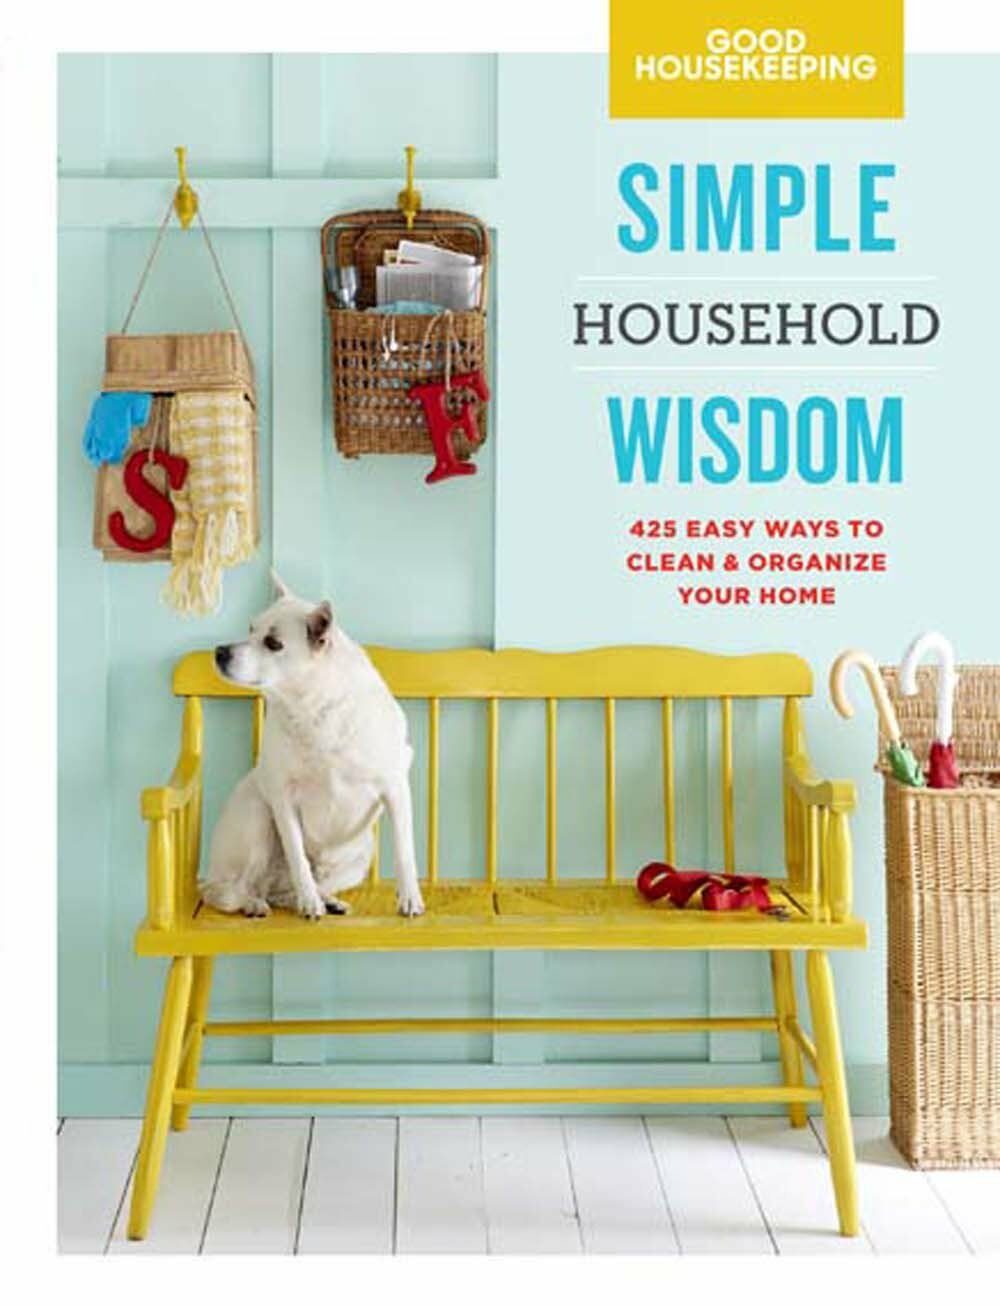 Good Housekeeping Simple Household Wisdom: 425 Easy Ways to Clean & Organize Your Homevolume 1 (Hardcover)